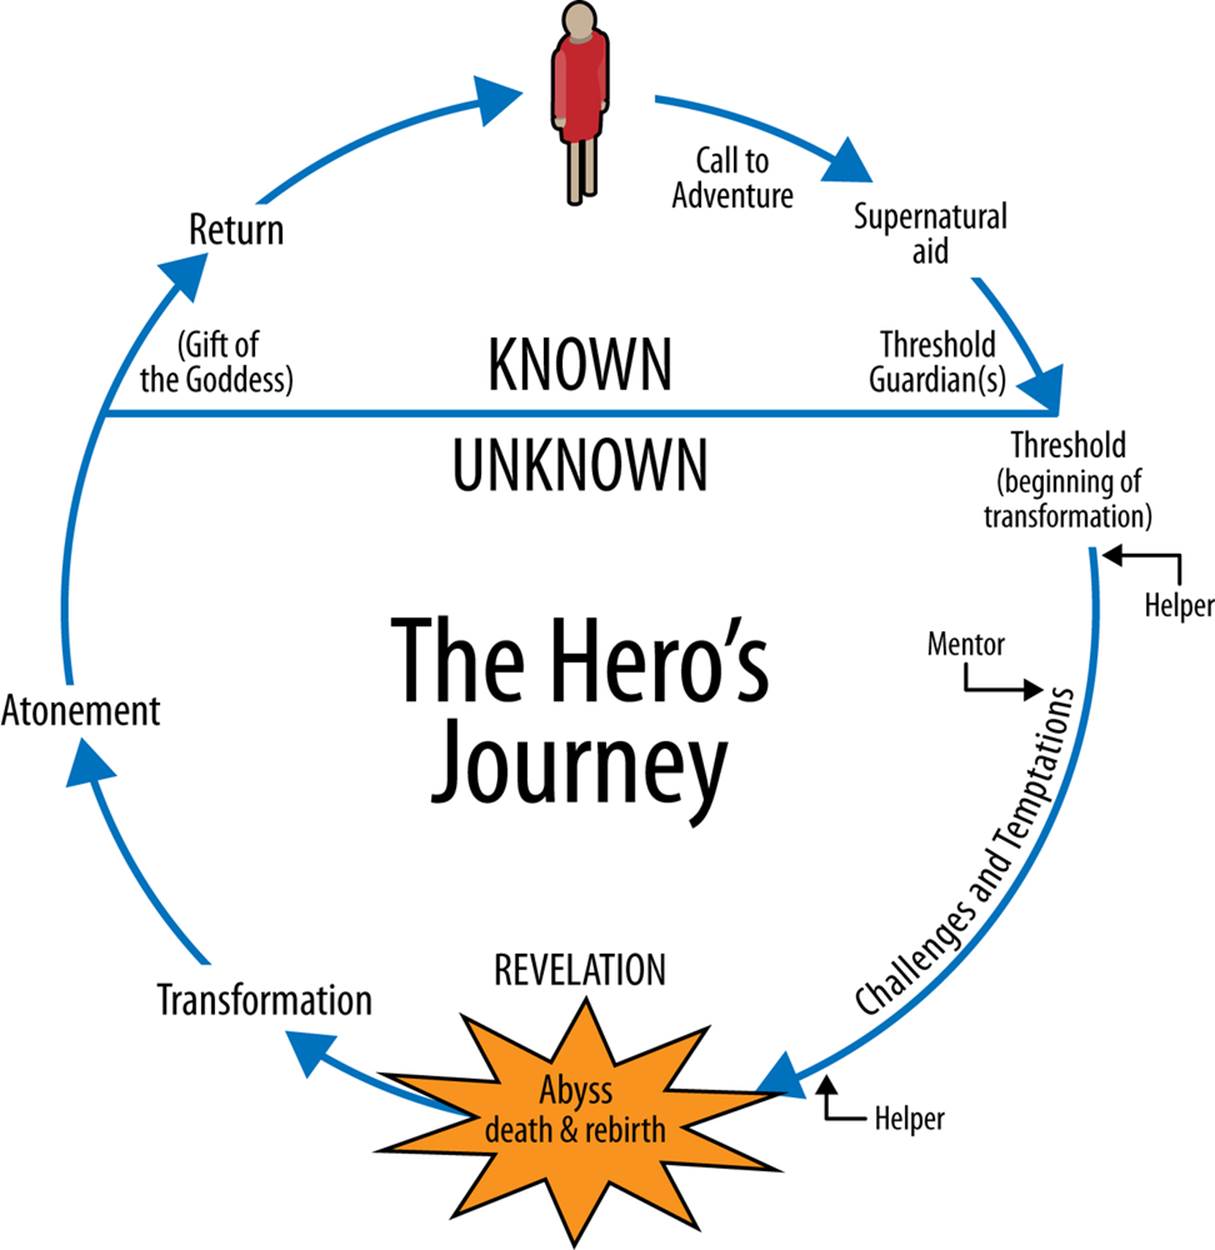 The cycle of the hero’s journey